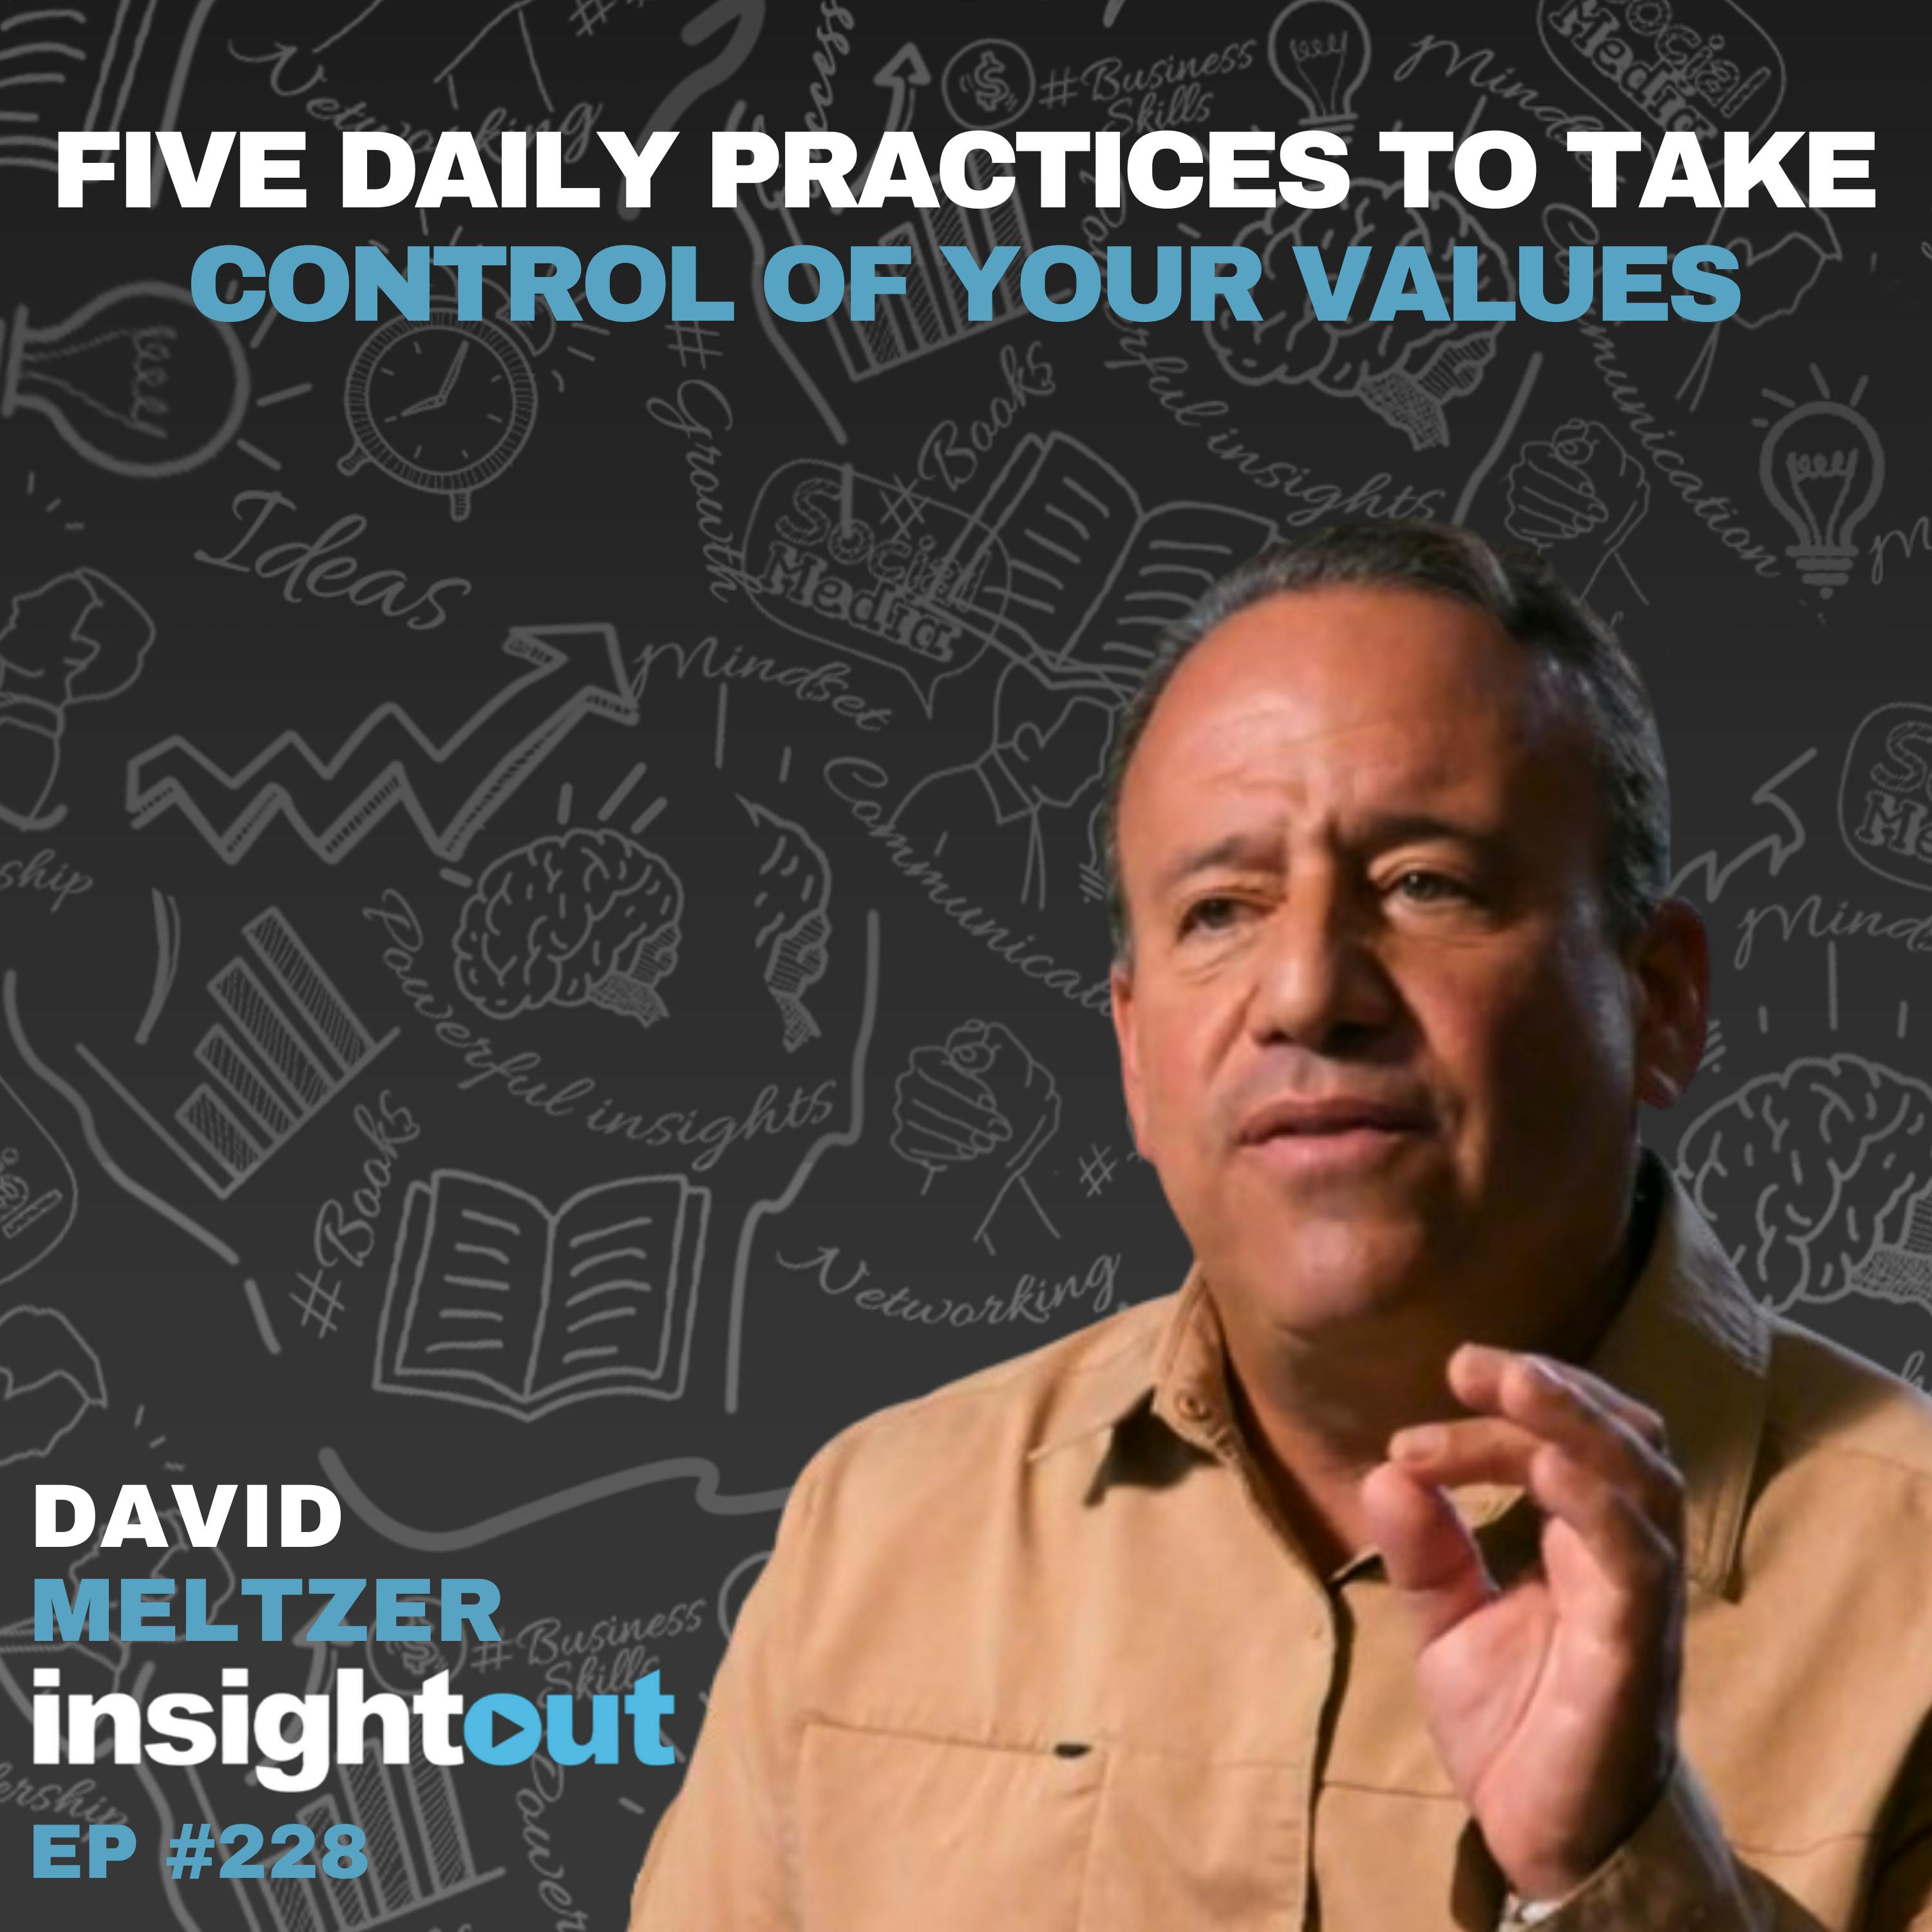 Five daily practices to take control of your values with David Meltzer